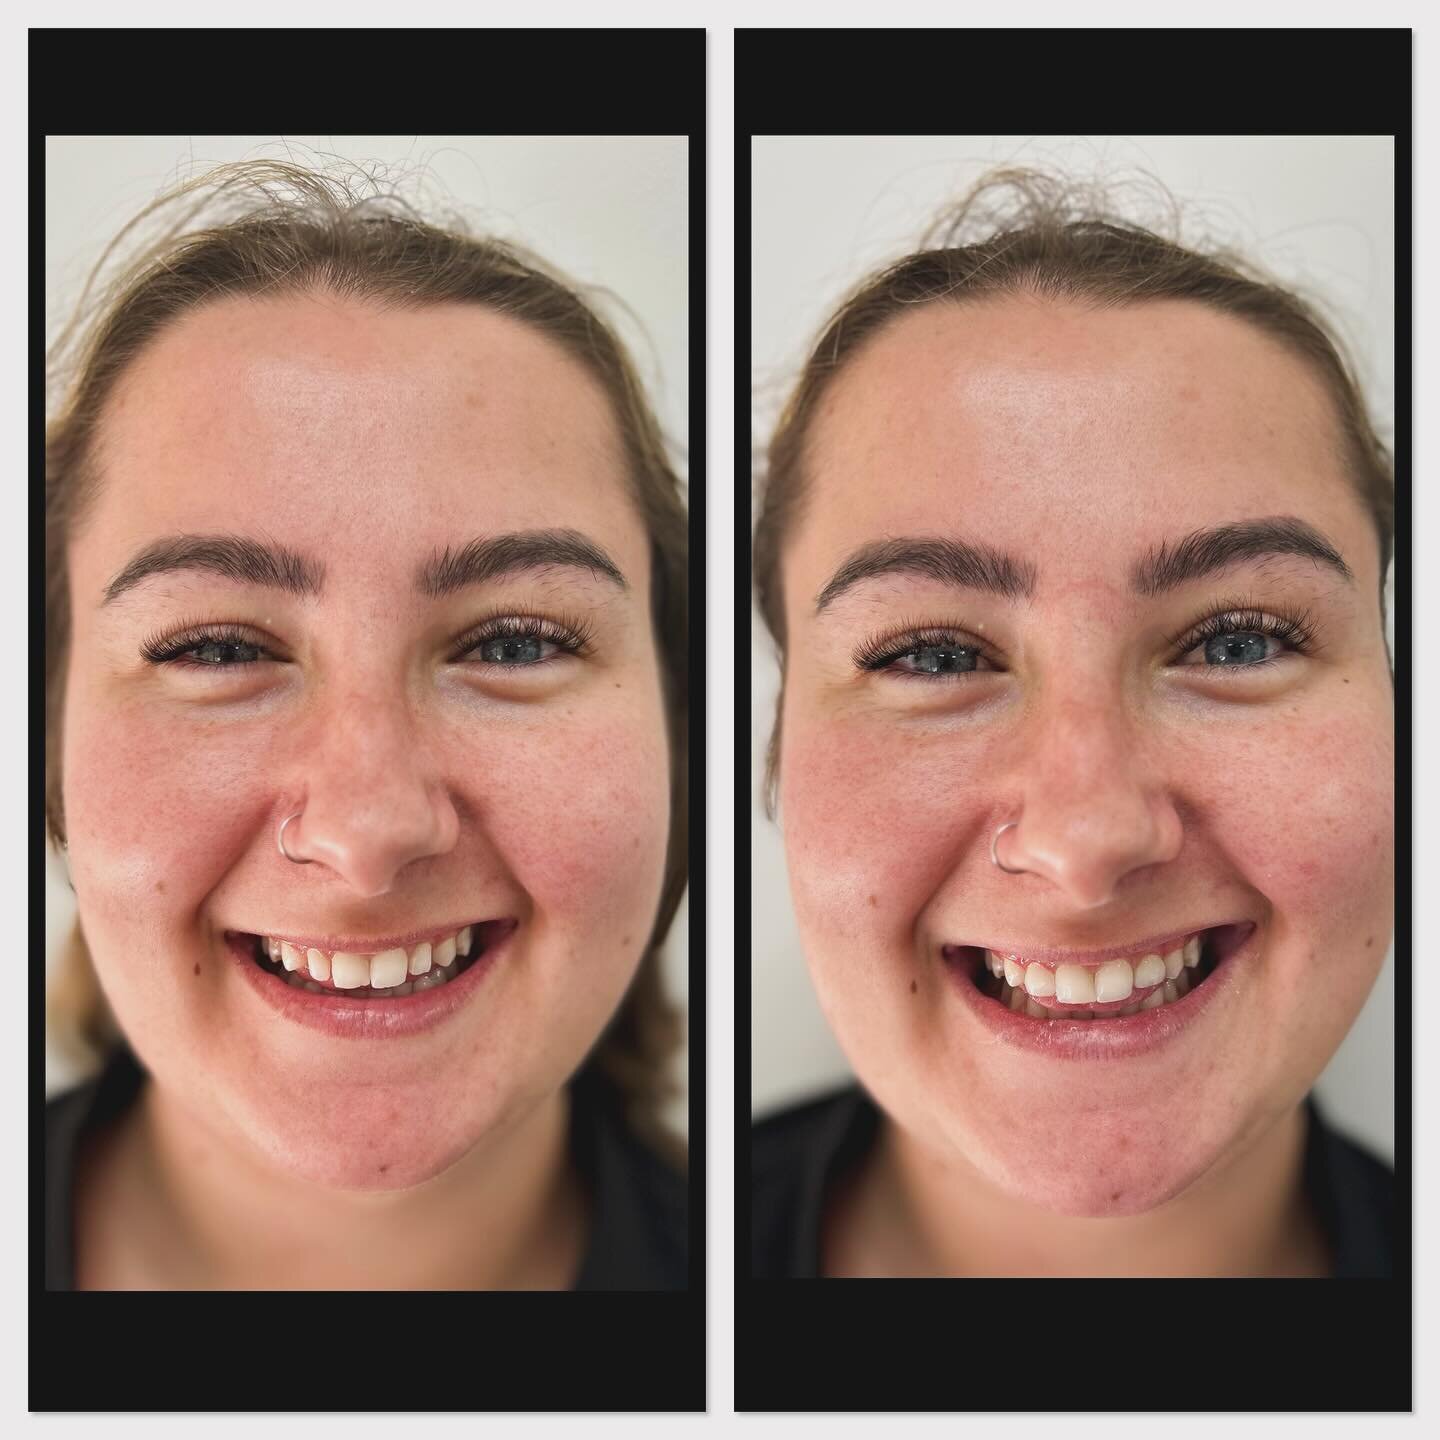 A natural, one visit smile enhancement for our beautiful dental assistant Shanni!

Dr Liz used resin to reduce the gaps between the teeth and create a more even smile. 🙌